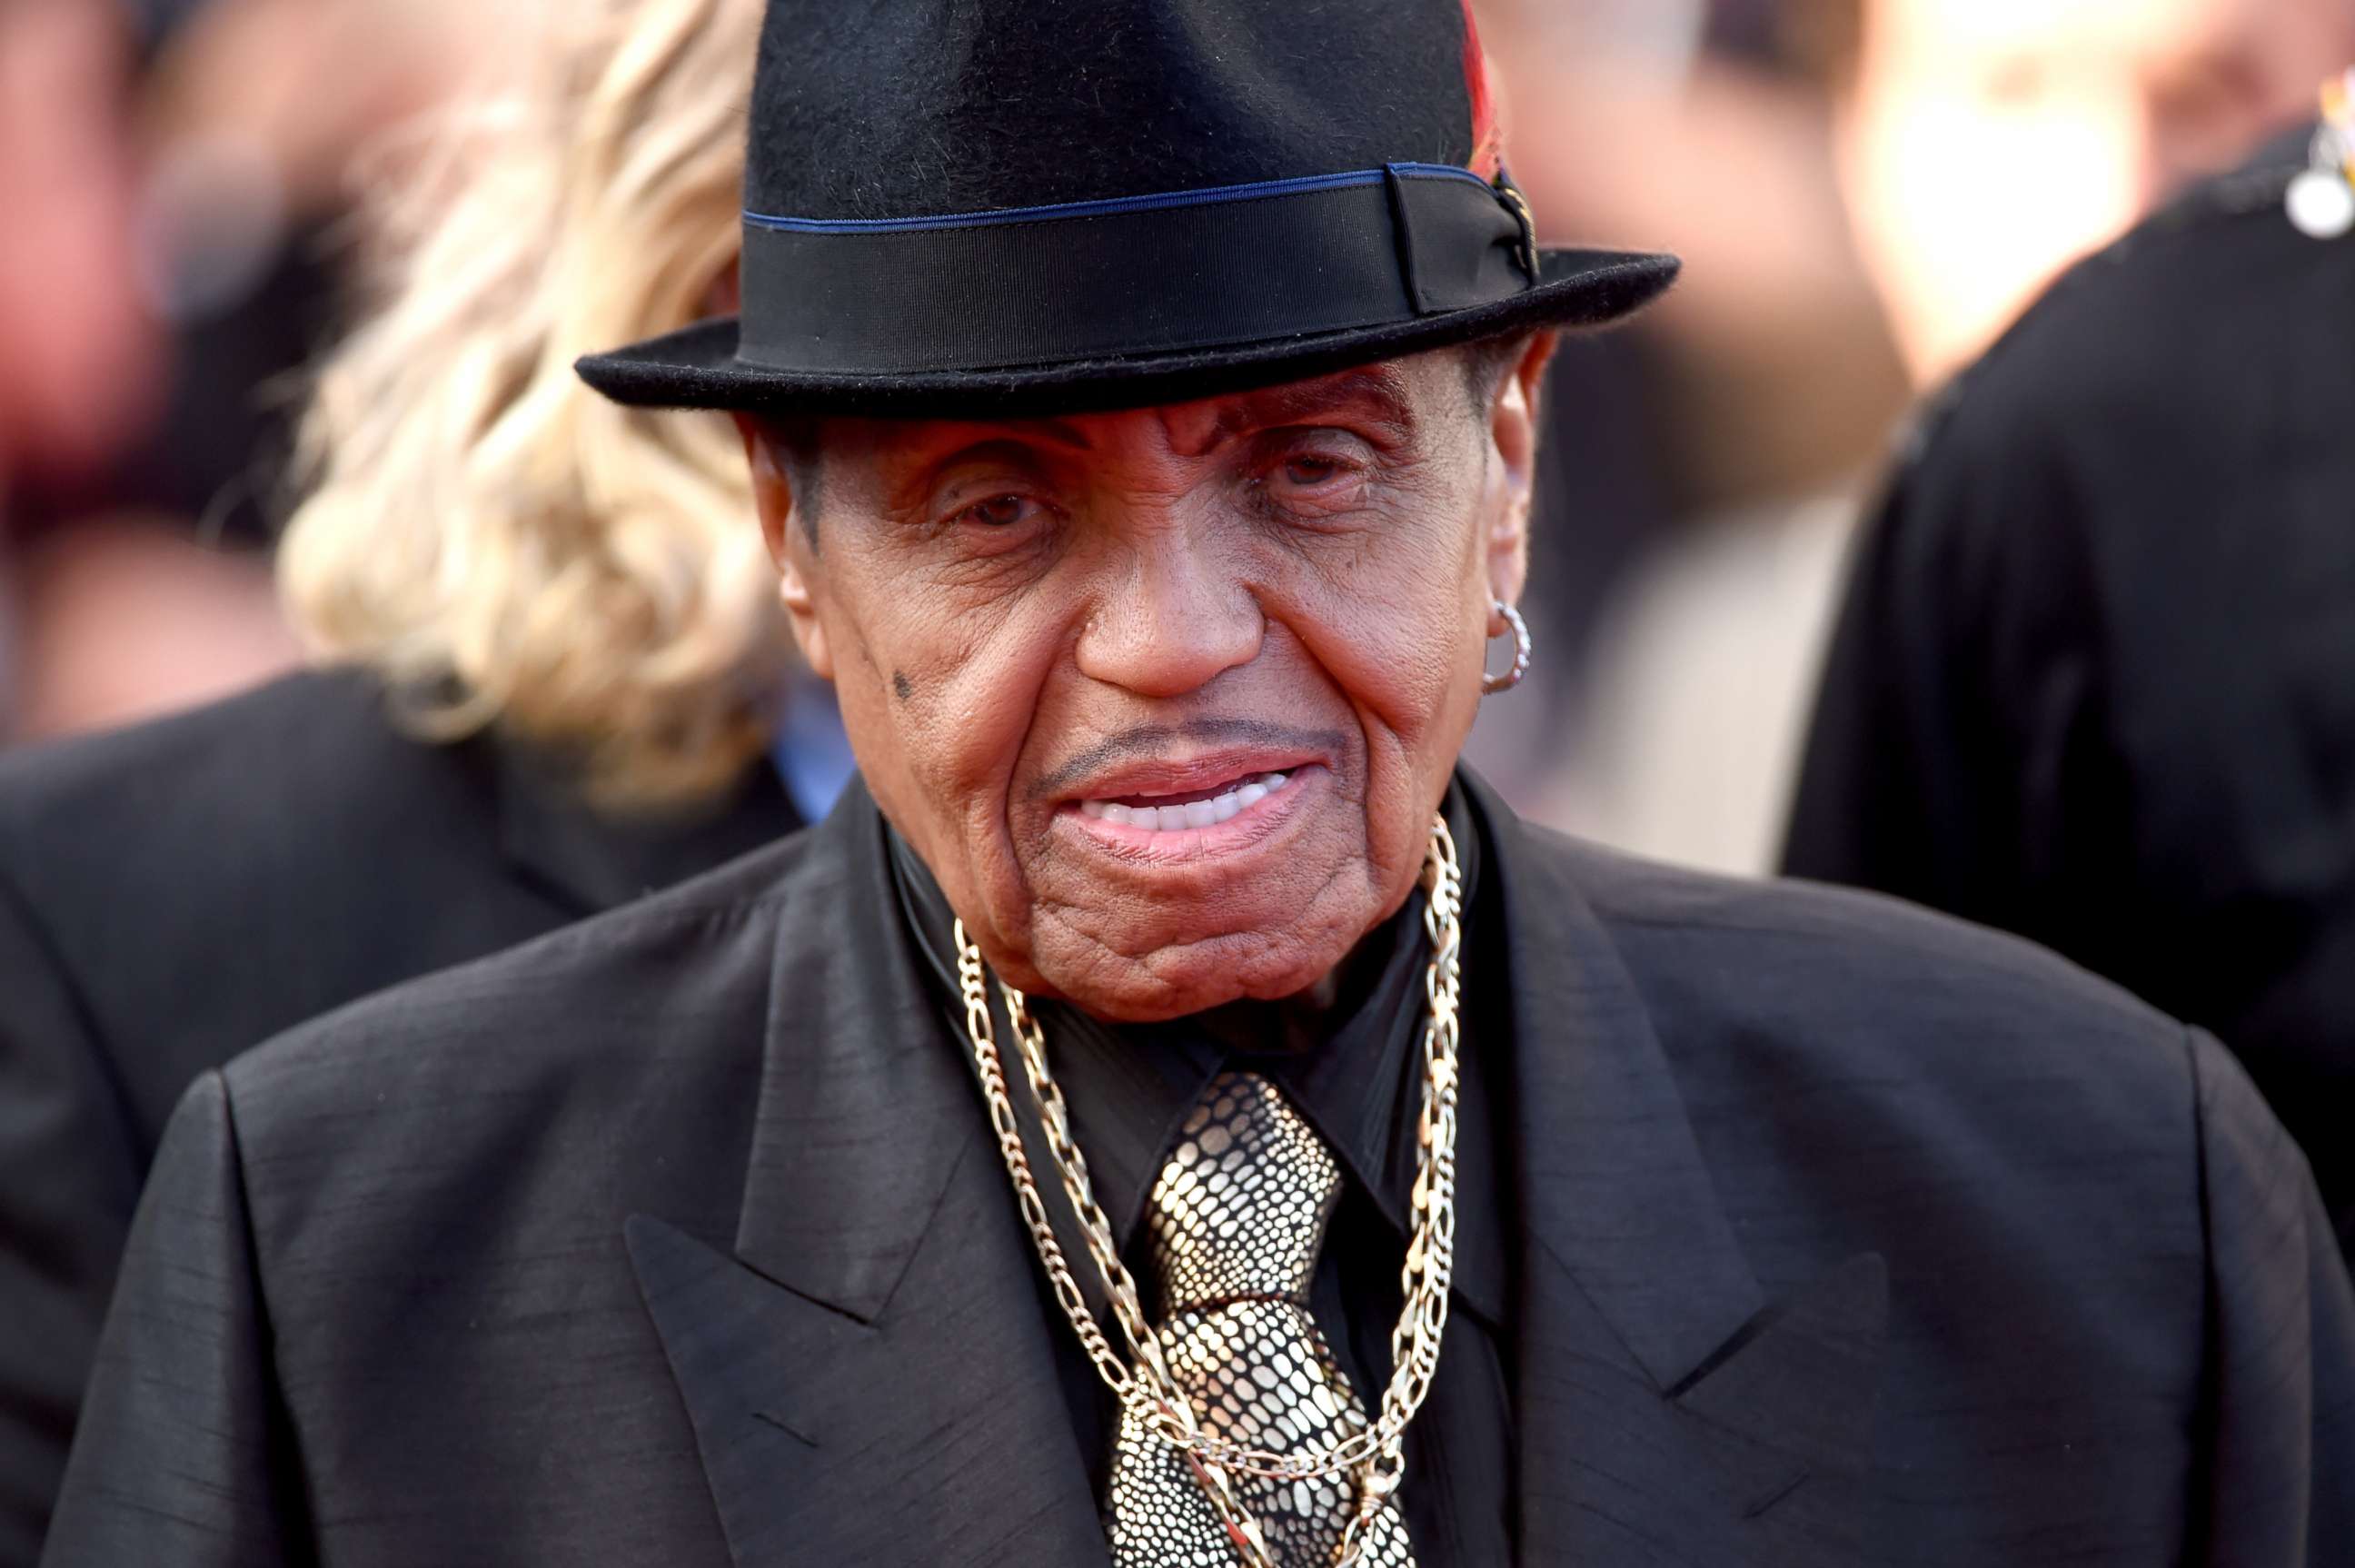 PHOTO: Joe Jackson attends a film premiere during the 67th Annual Cannes Film Festival on May 23, 2014 in Cannes, France.